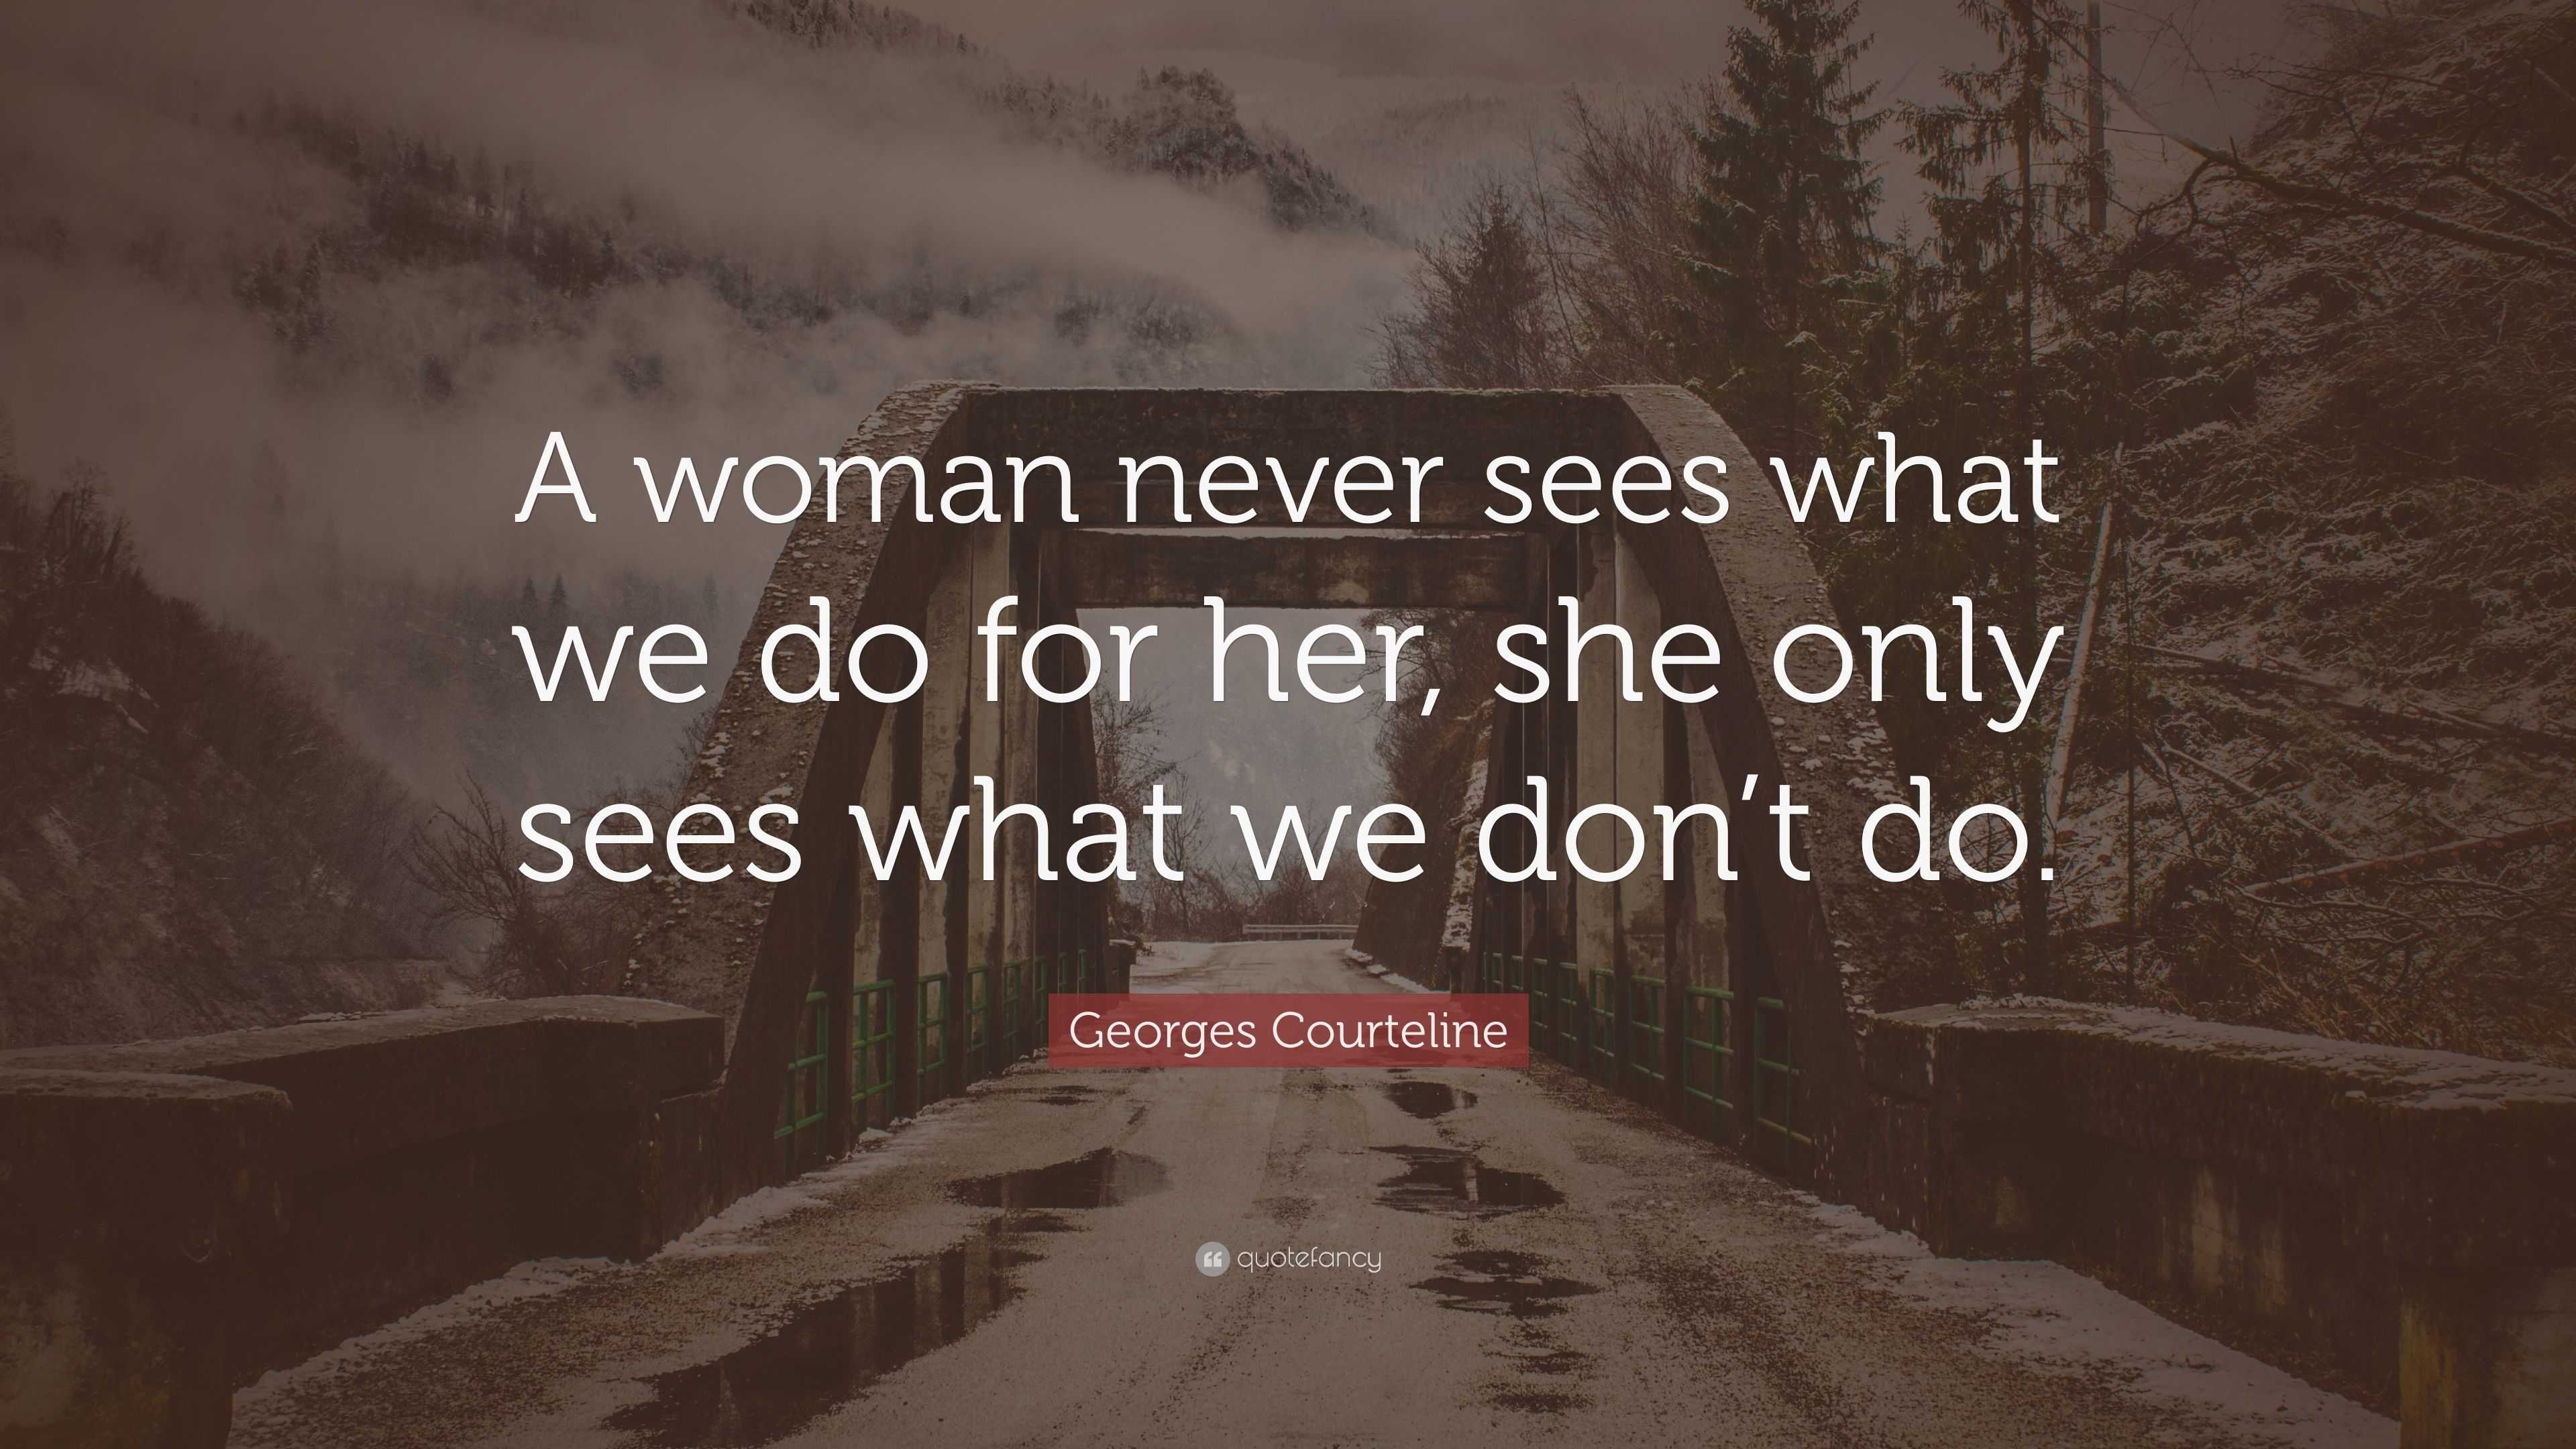 Georges Courteline Quote: “A woman never sees what we do for her, she ...